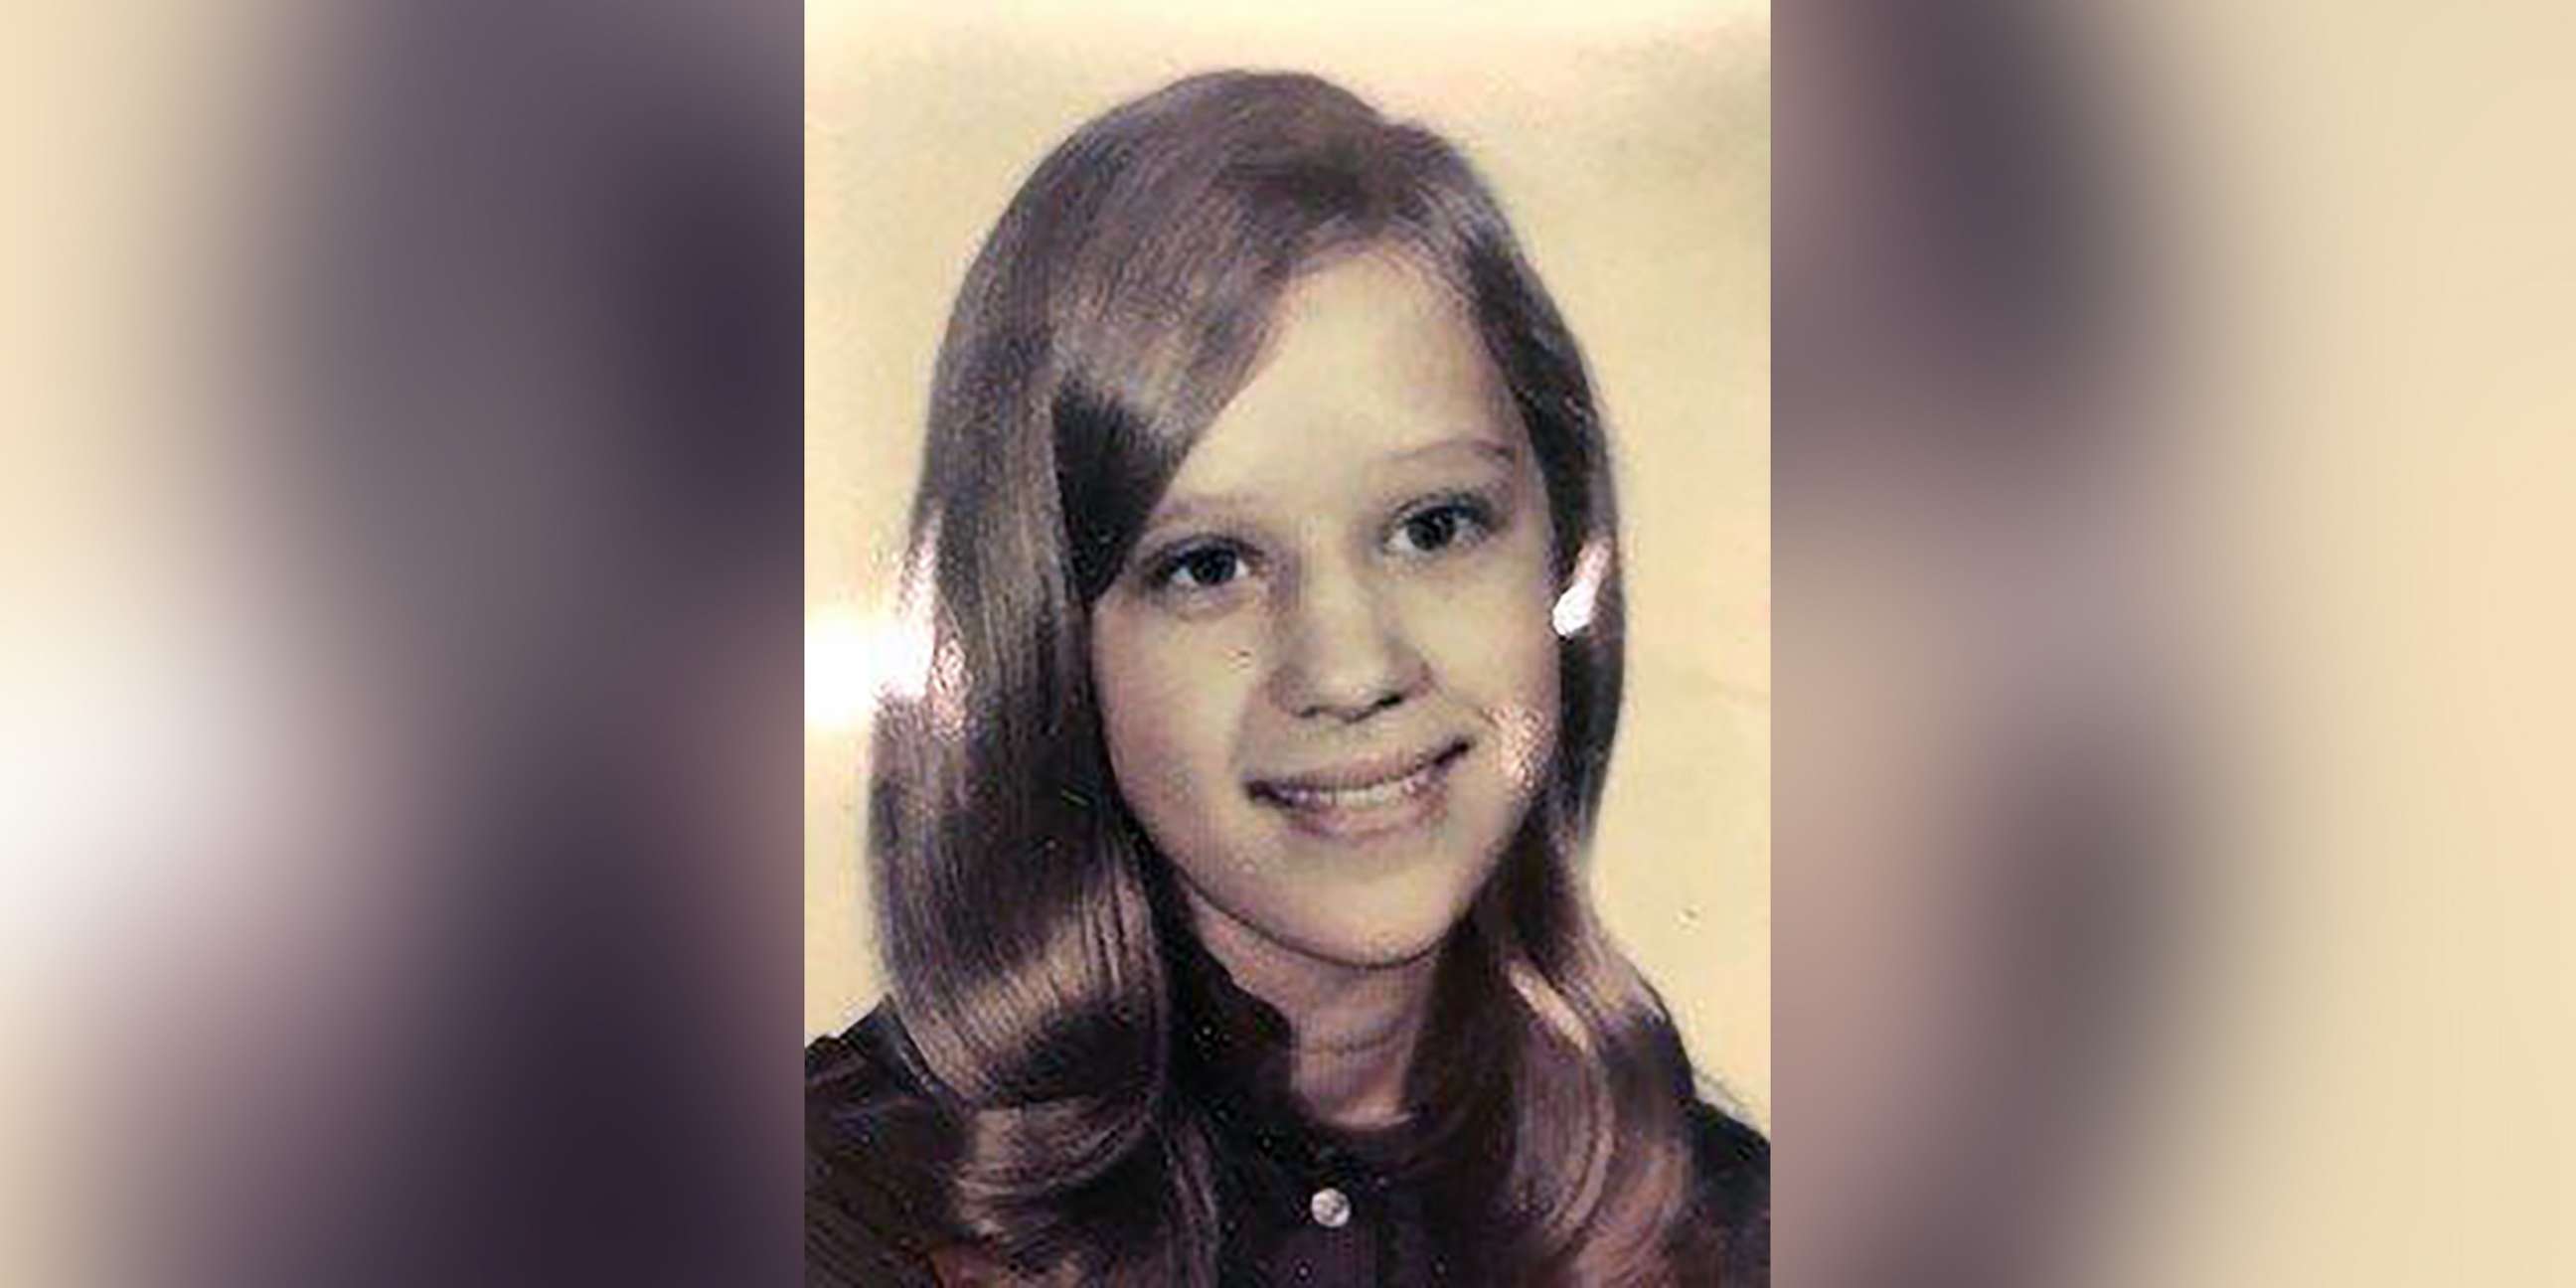 PHOTO: Julie Ann Hanson, who was found murdered in 1972, is pictured in an undated family photo released by the Naperville Police in Illinois.